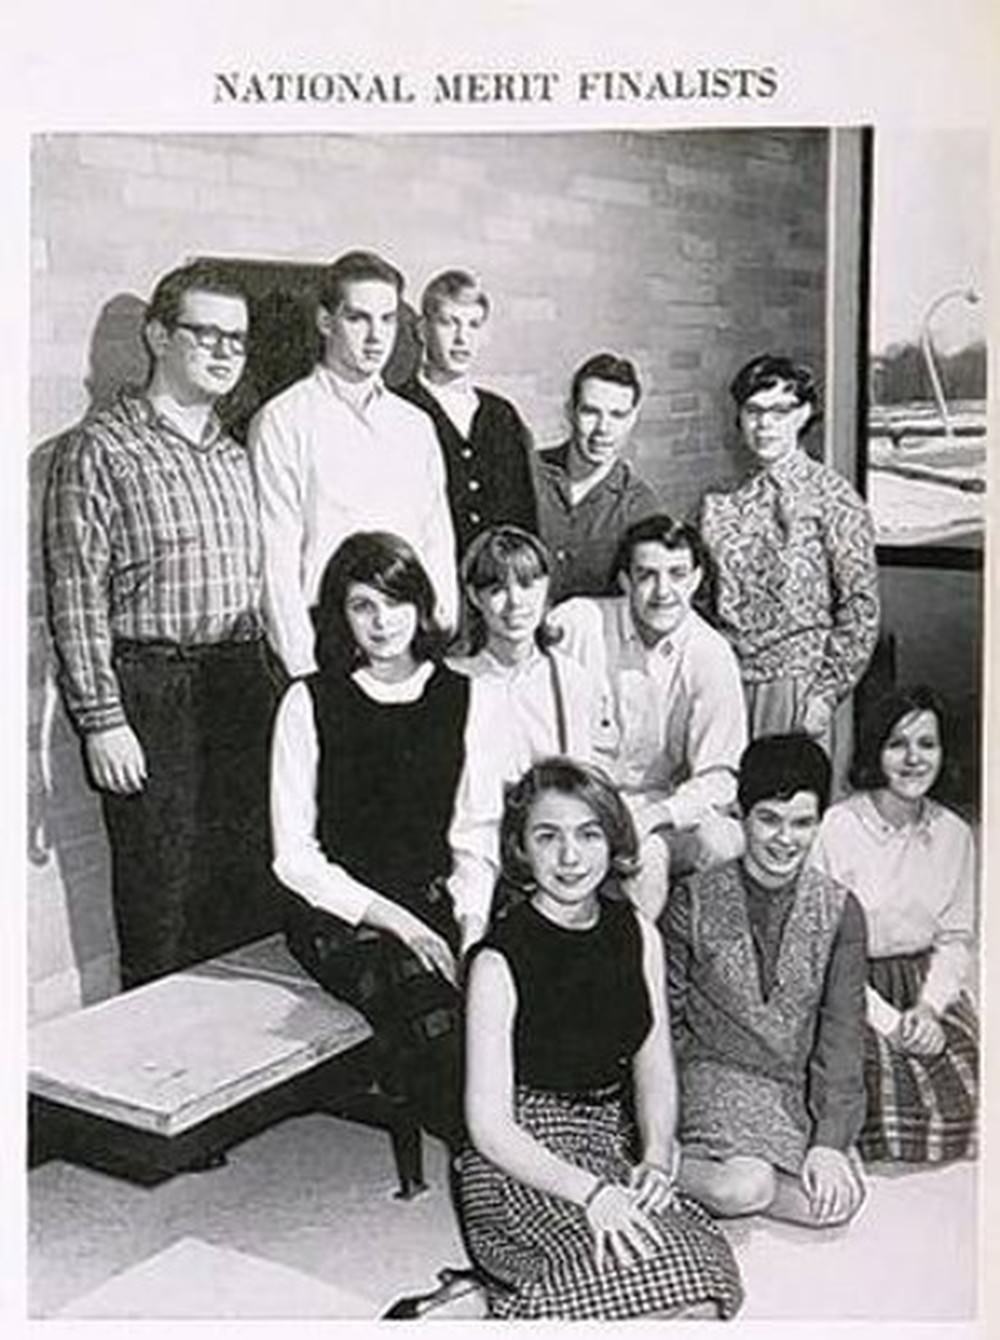 Hillary Rodham, one of 11 elite students, reached the final round of the Merit National Scholarship Program, 1964